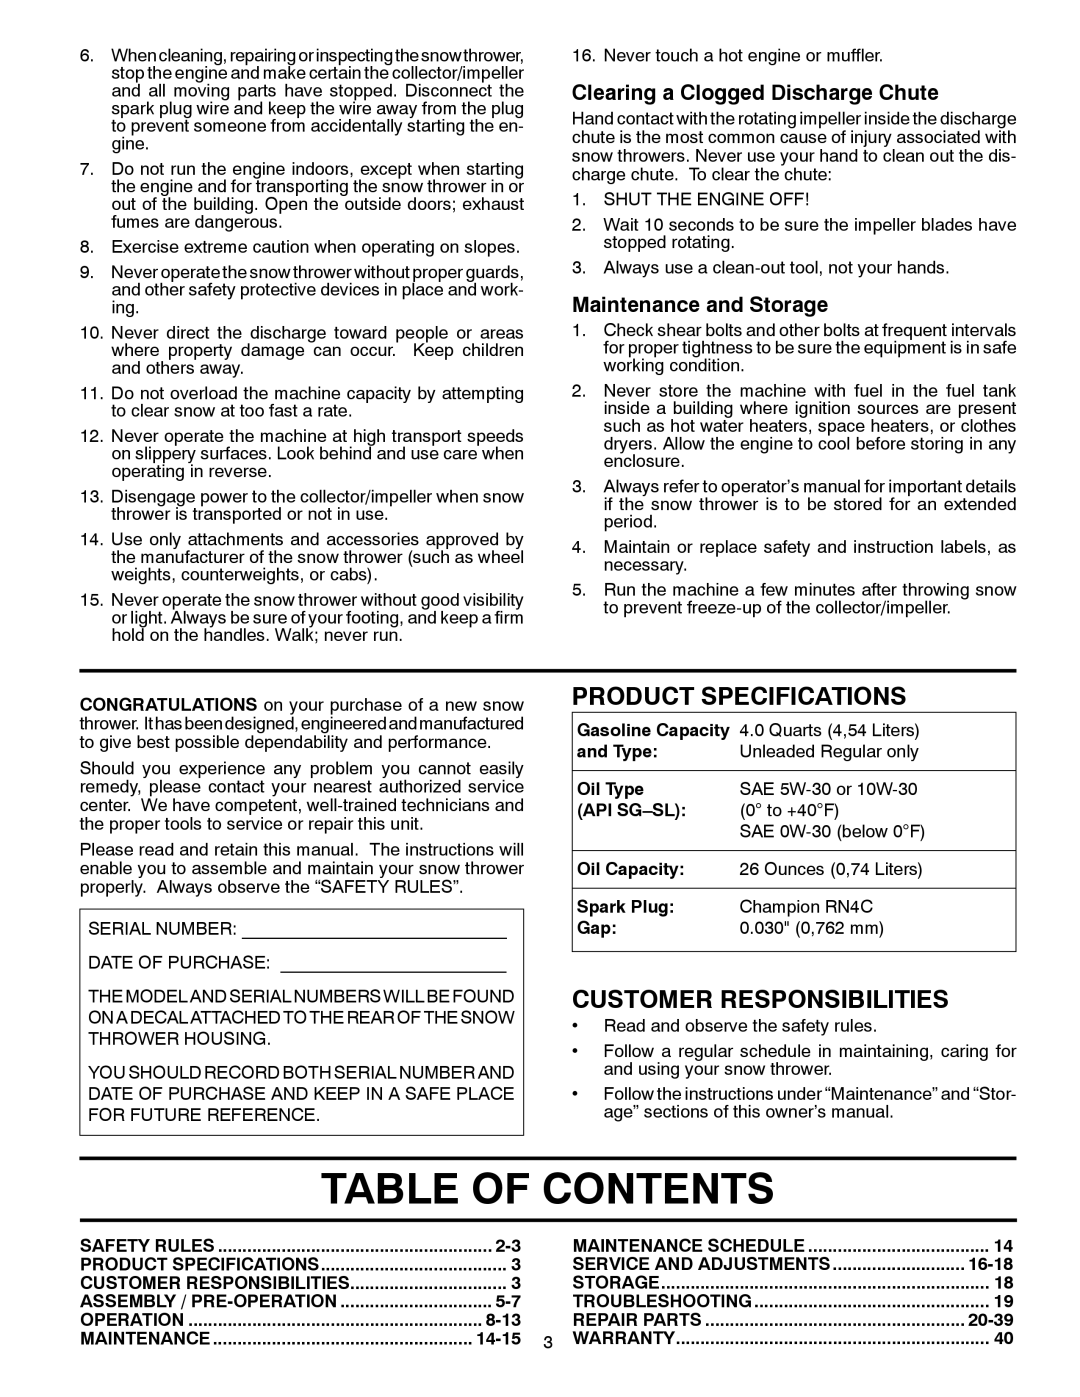 Poulan 961980022 Table Of Contents, Product Specifications, Customer Responsibilities, Clearing a Clogged Discharge Chute 